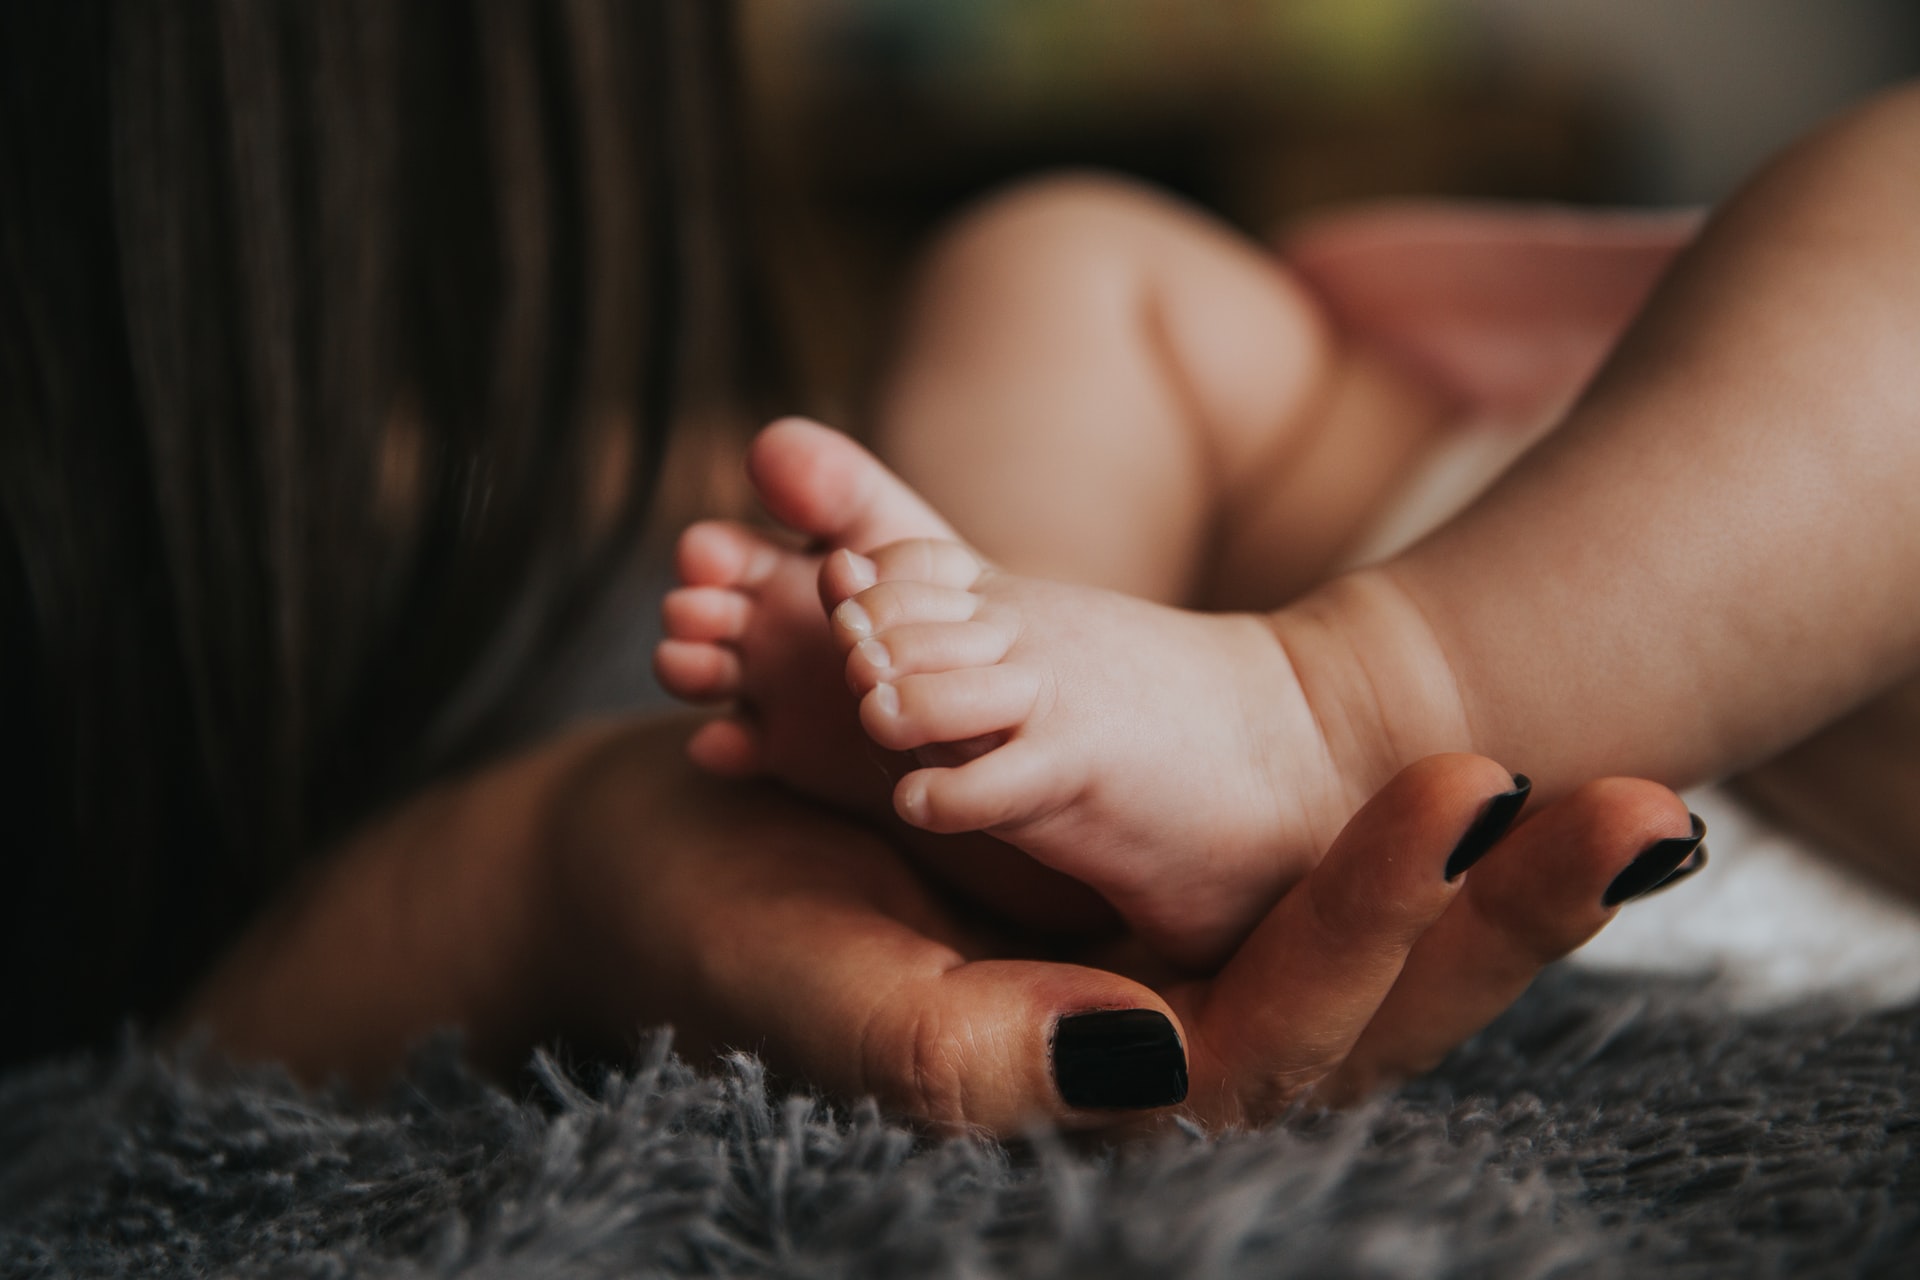 A hand with black nail polish supports a baby's feet. Image: Alex Pasarelu/Unsplash